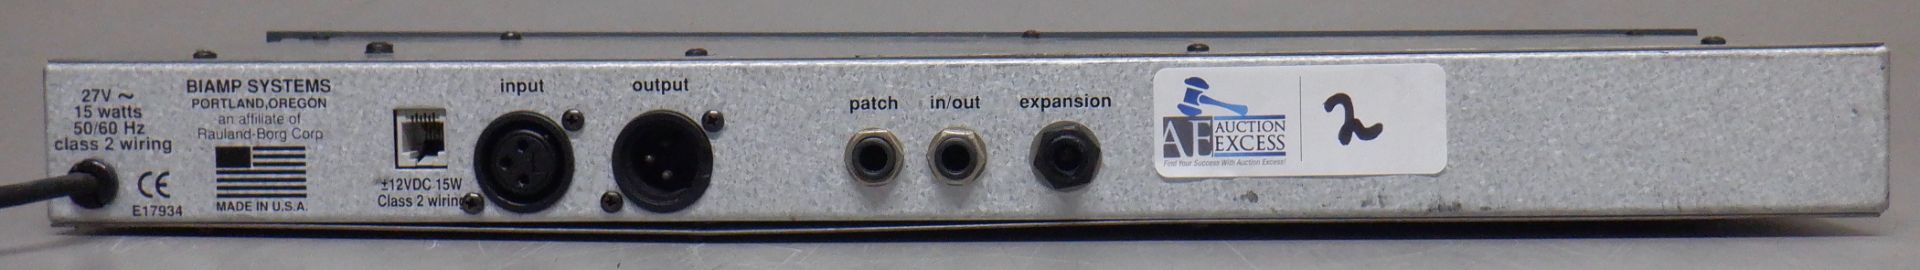 BIAMP ADVATAGE GM GAIN MANAGER - Image 2 of 2